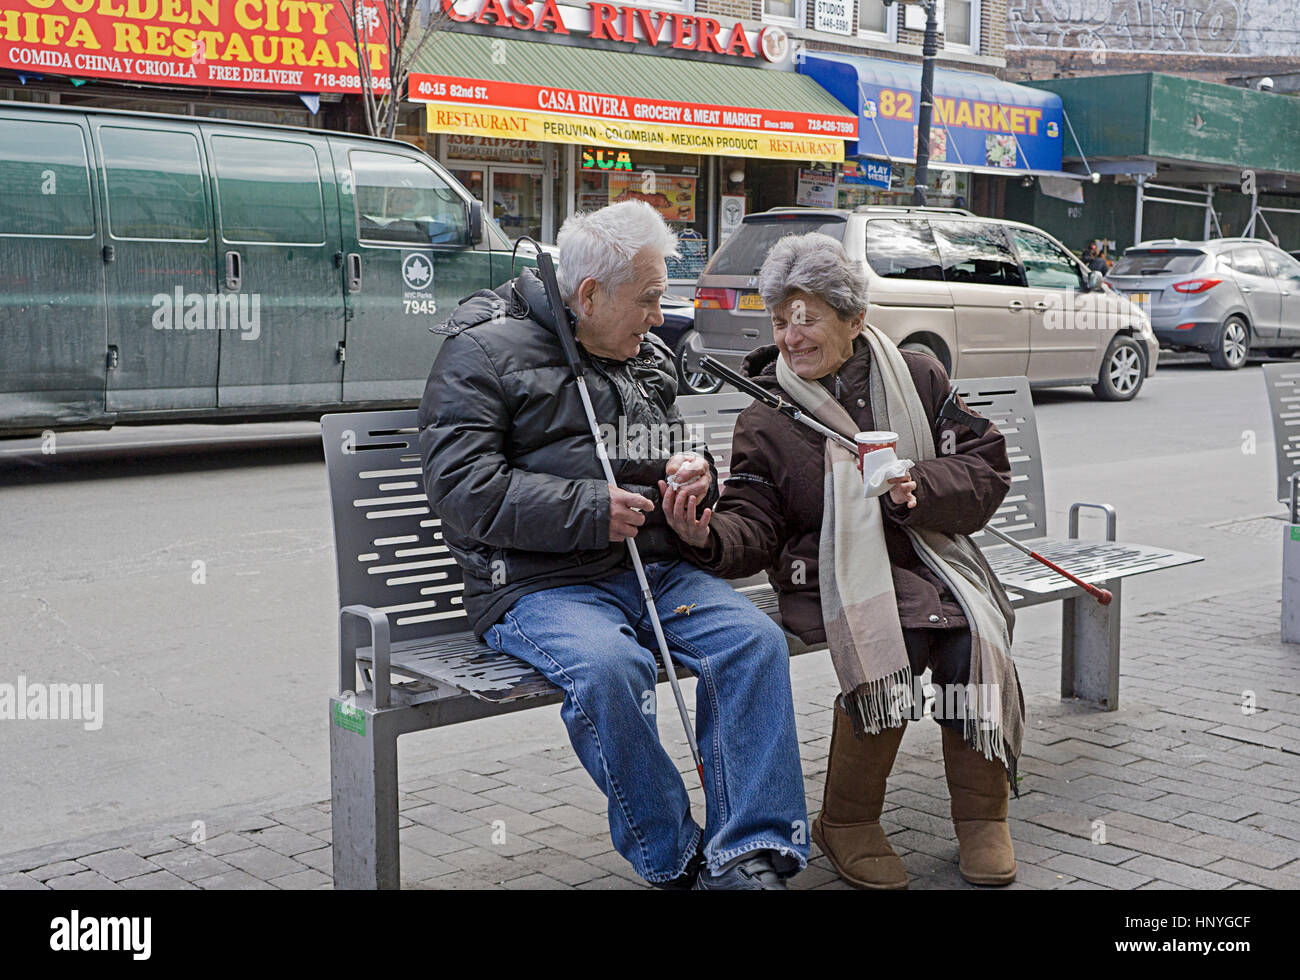 A visually impaired couple seated on a bench in the winter in Jackson Heights Queens New York City Stock Photo